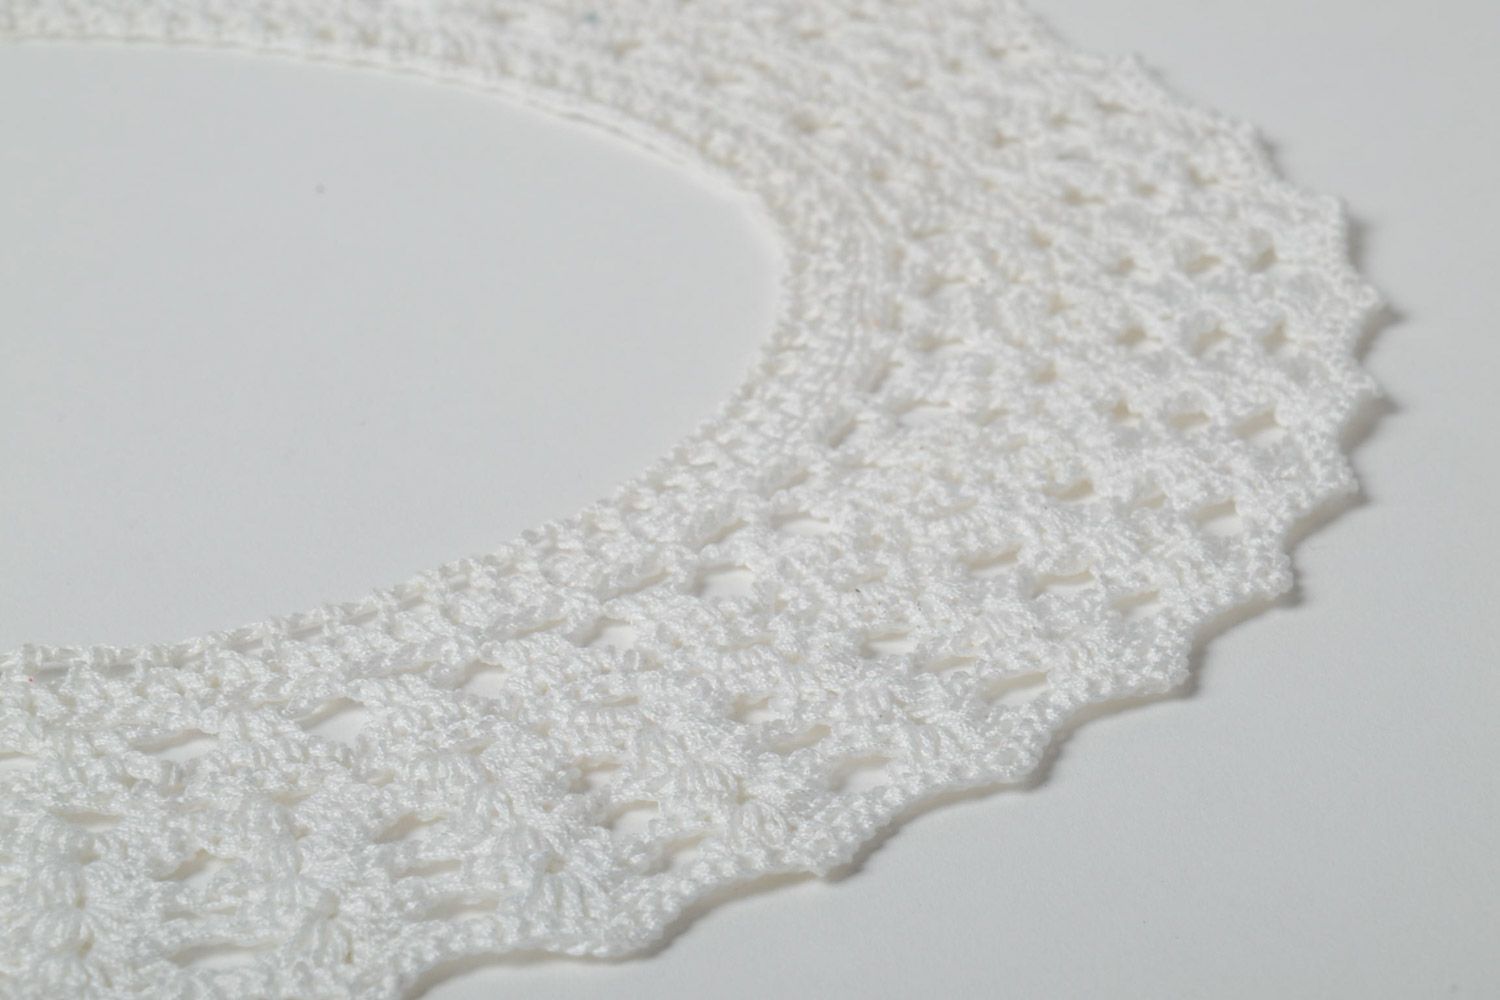 Handmade white lace detachable decorative collar crocheted of cotton threads photo 3